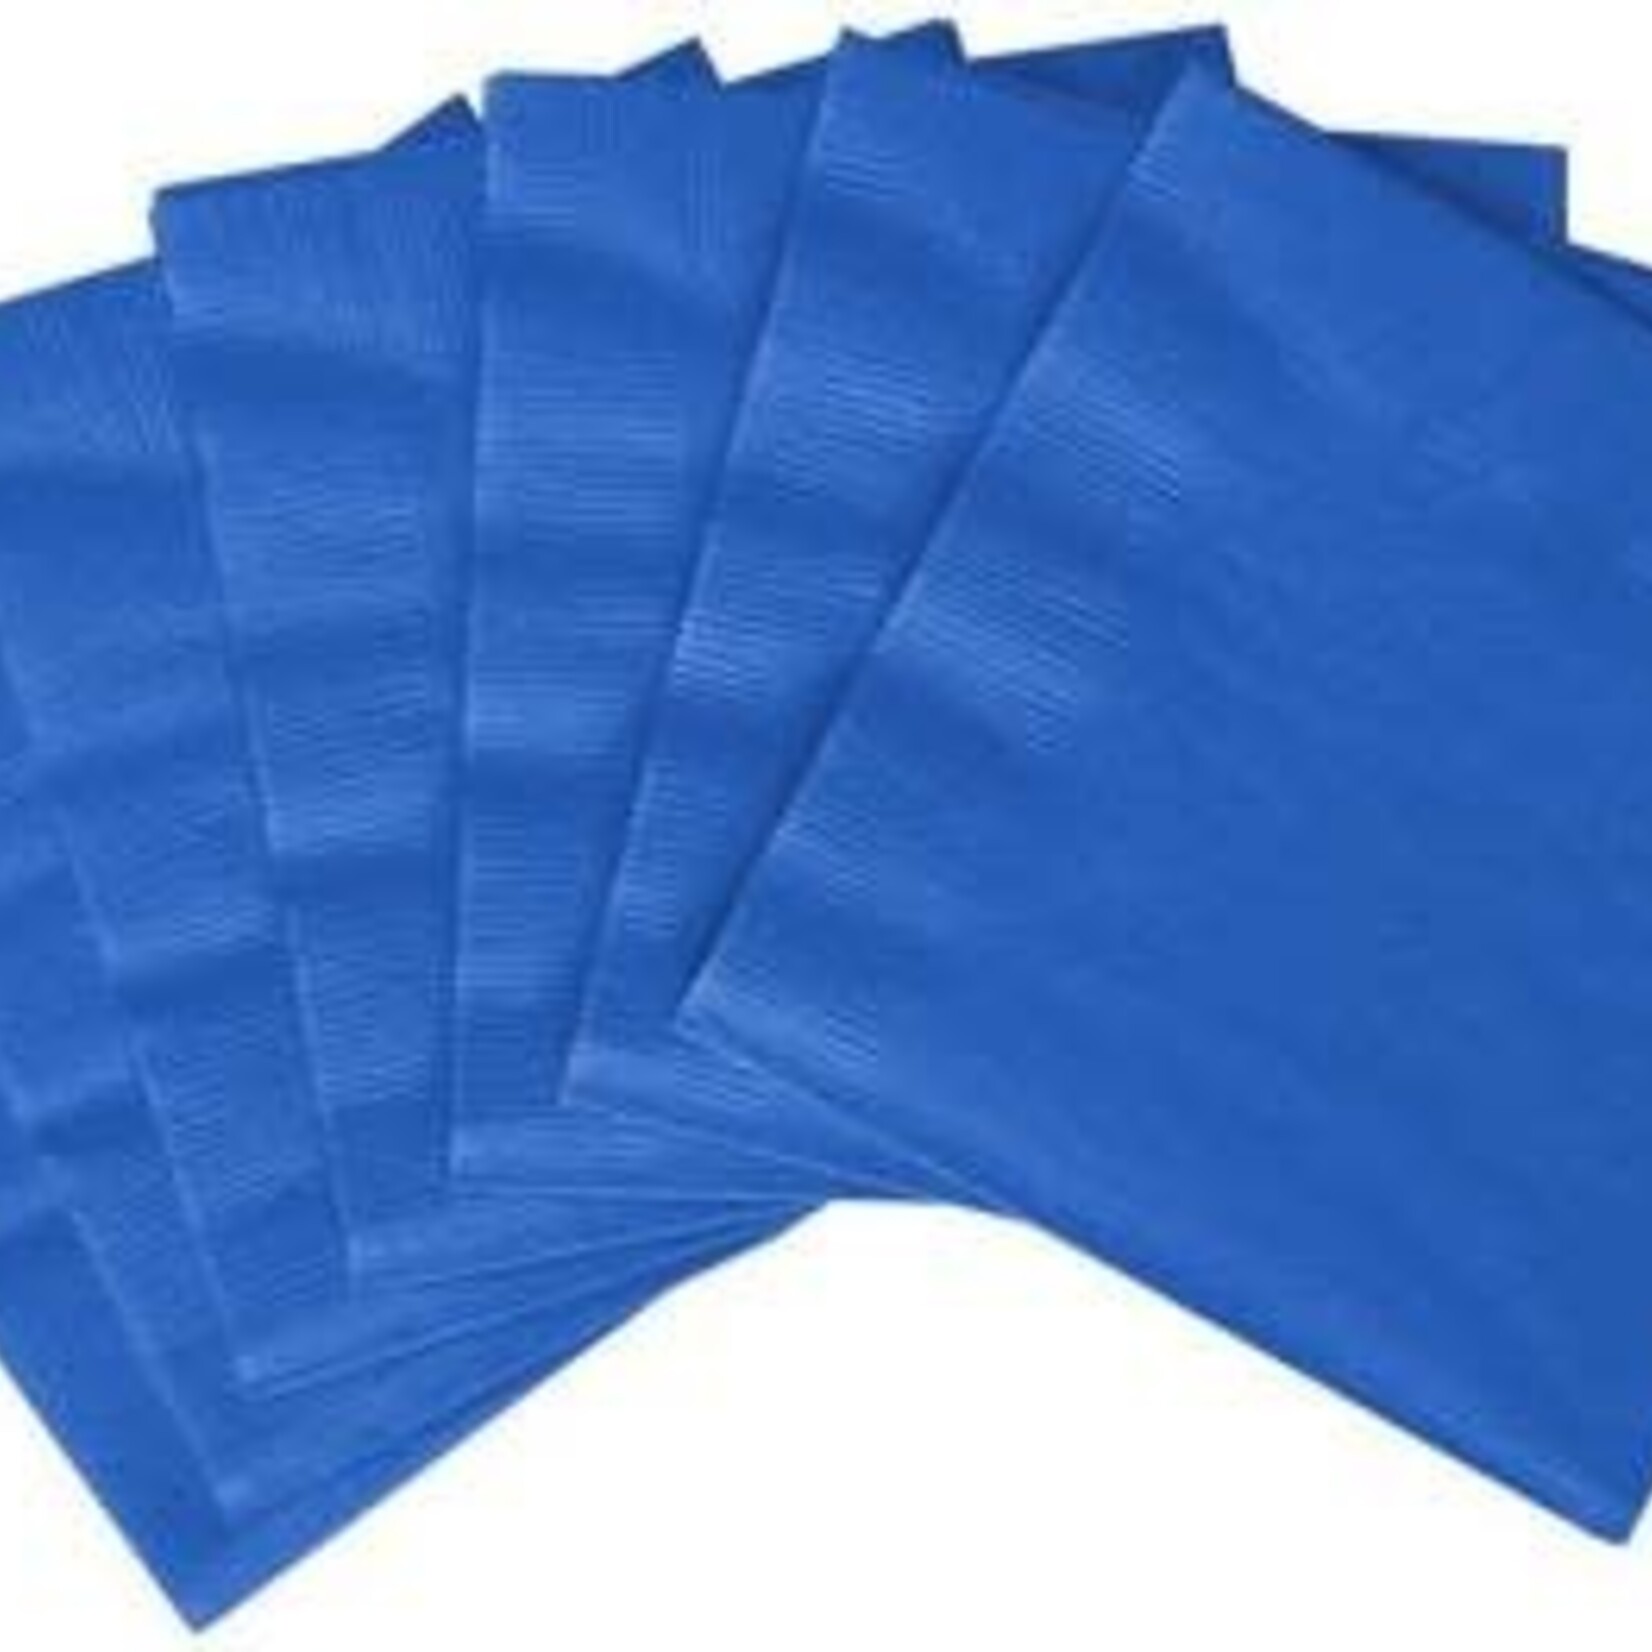 2-Ply Napkin 13 inches x 13 inches (20 pieces)